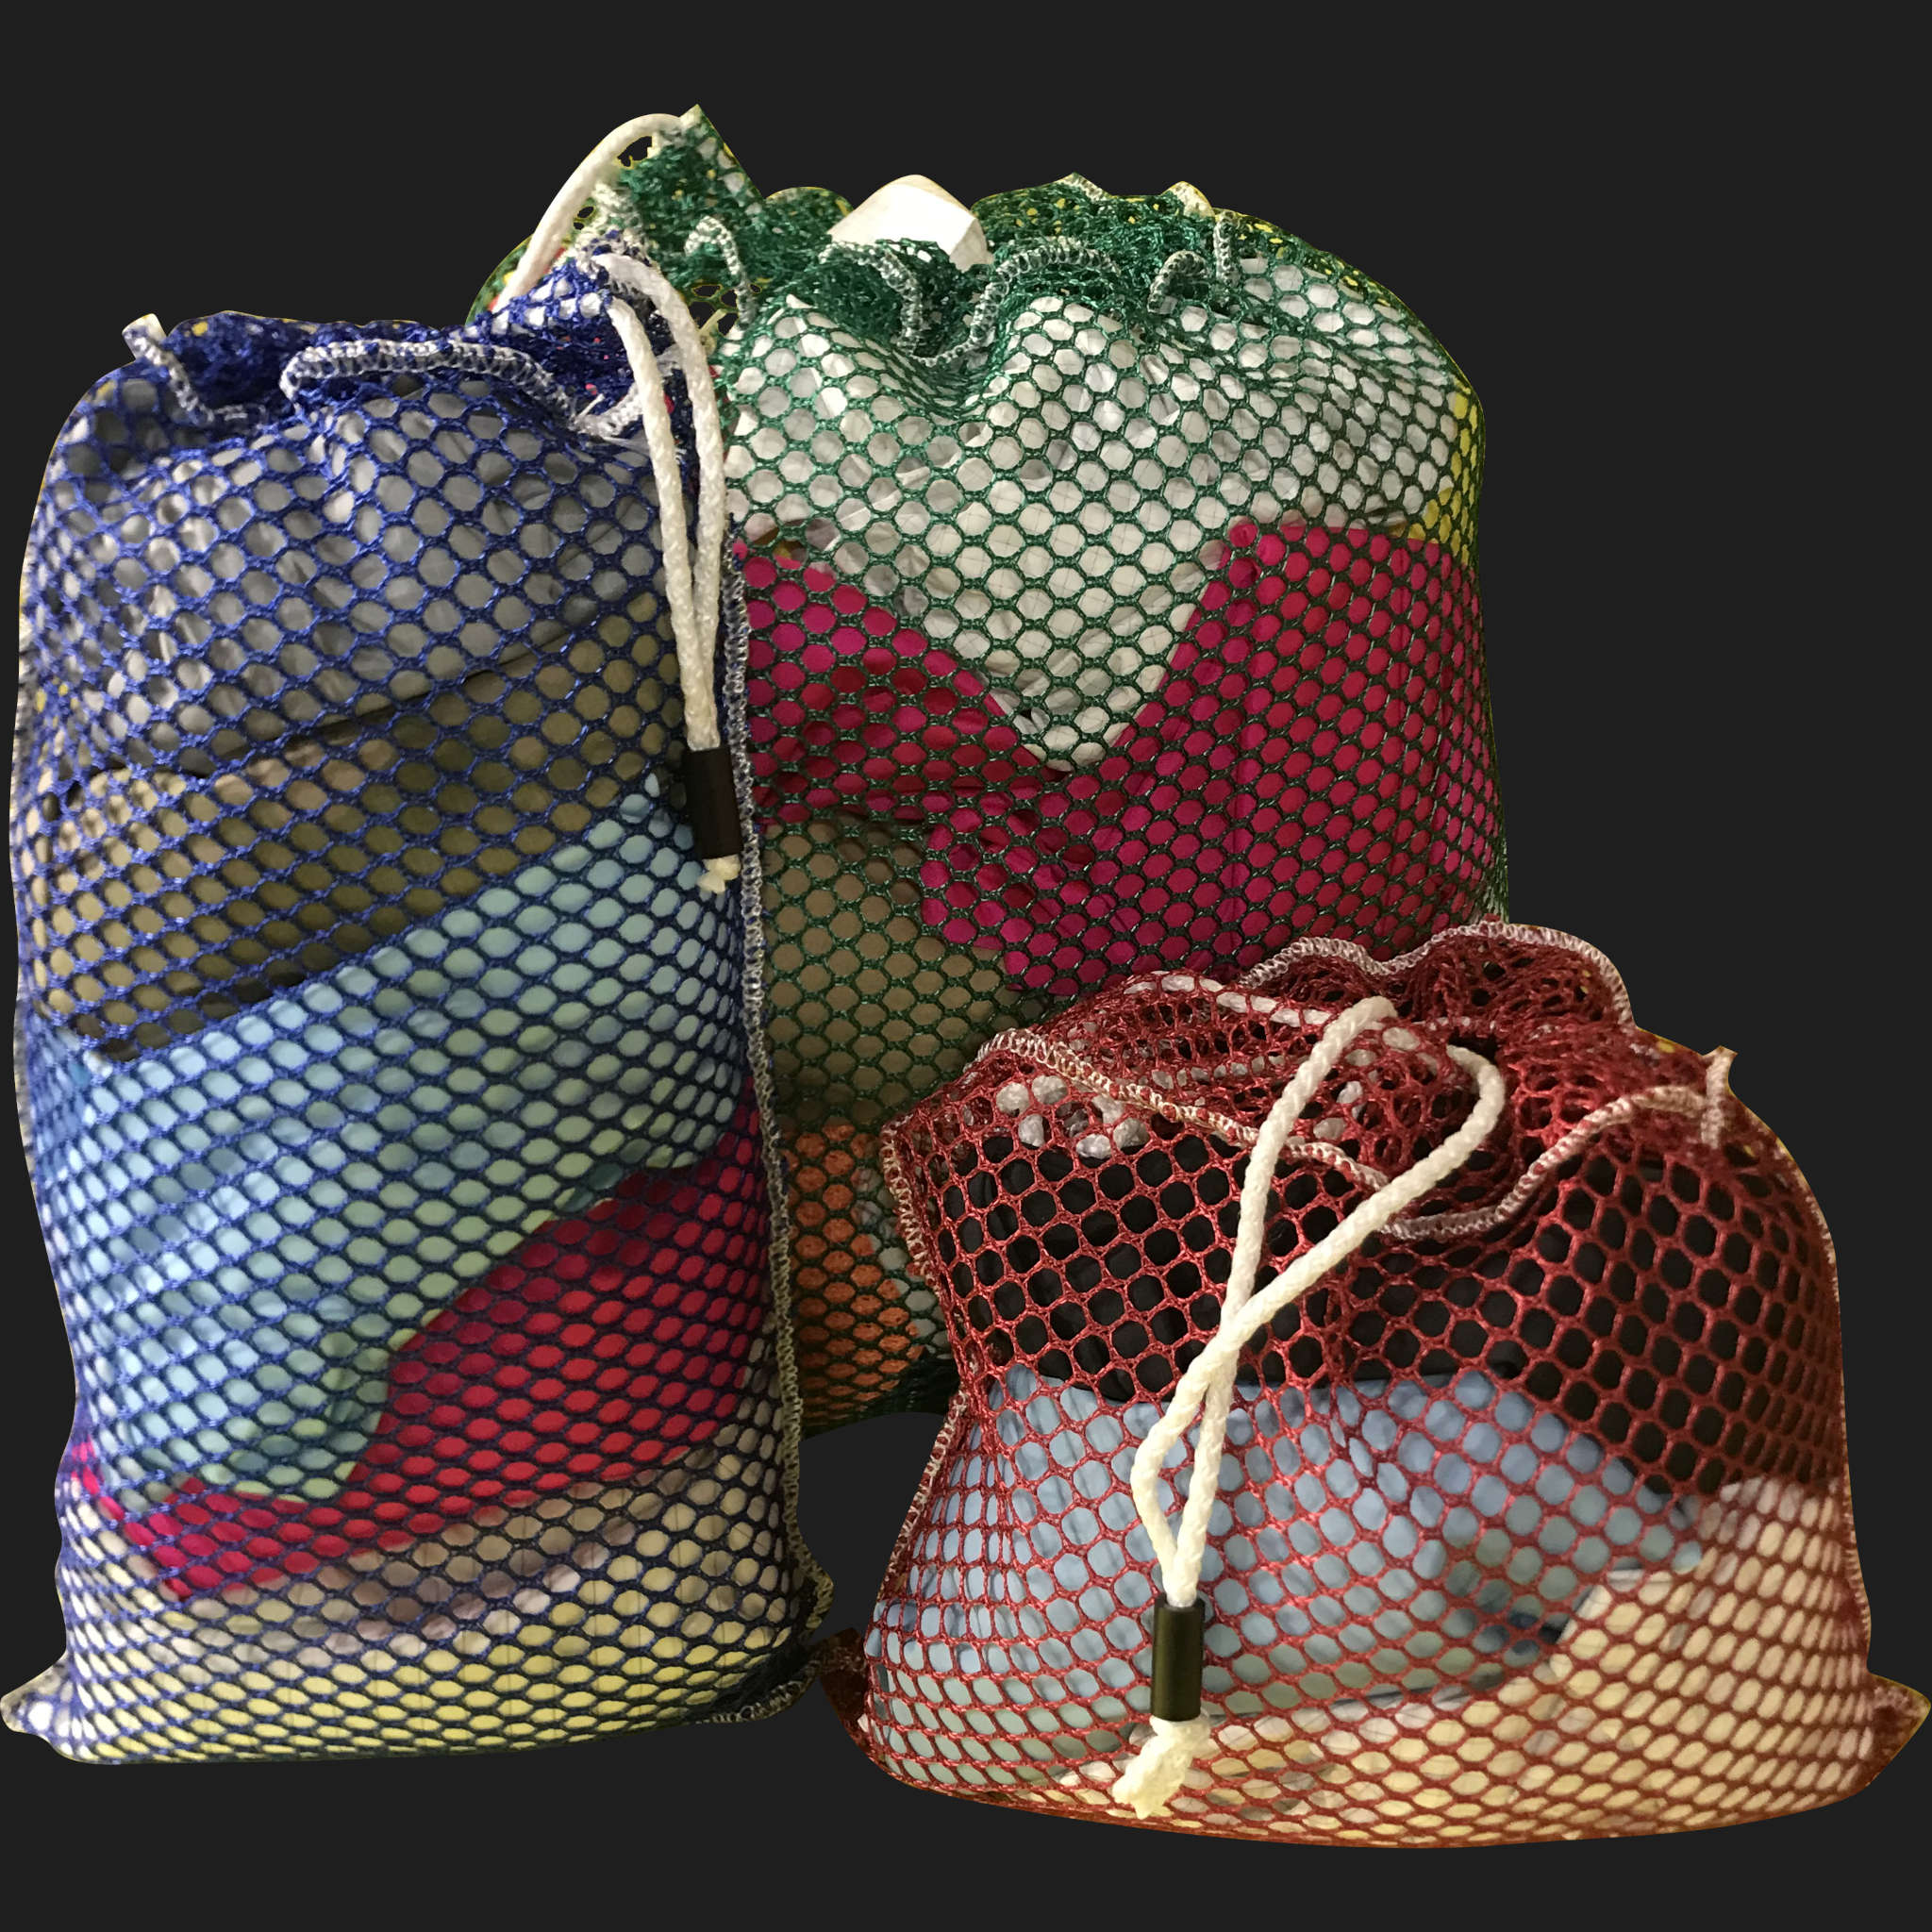 36" x 46" Customized Mesh-Net-Laundry Bags Heavy Duty with Cord and barrellock closure